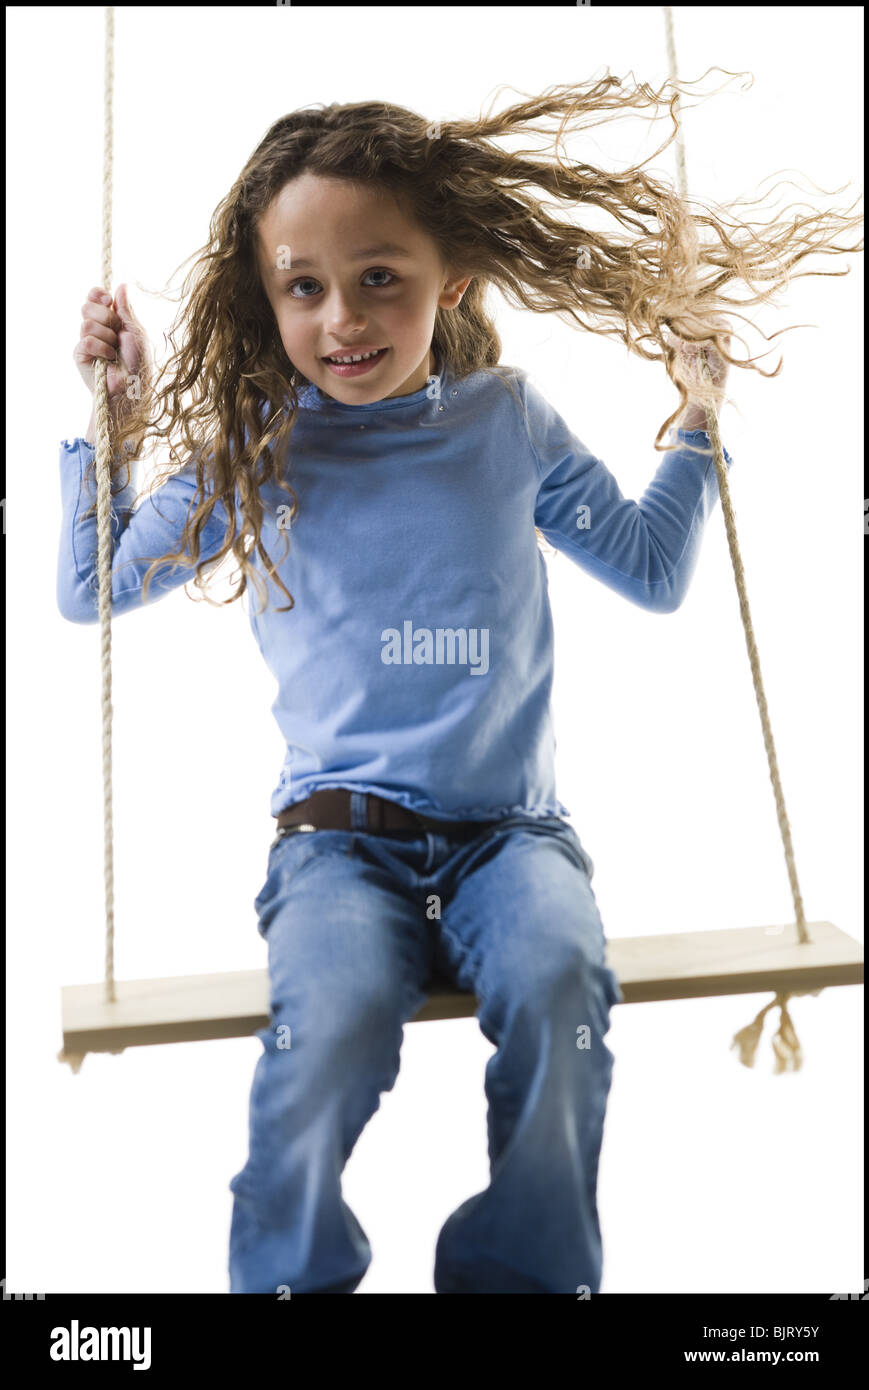 Young girl playing on a swing Stock Photo